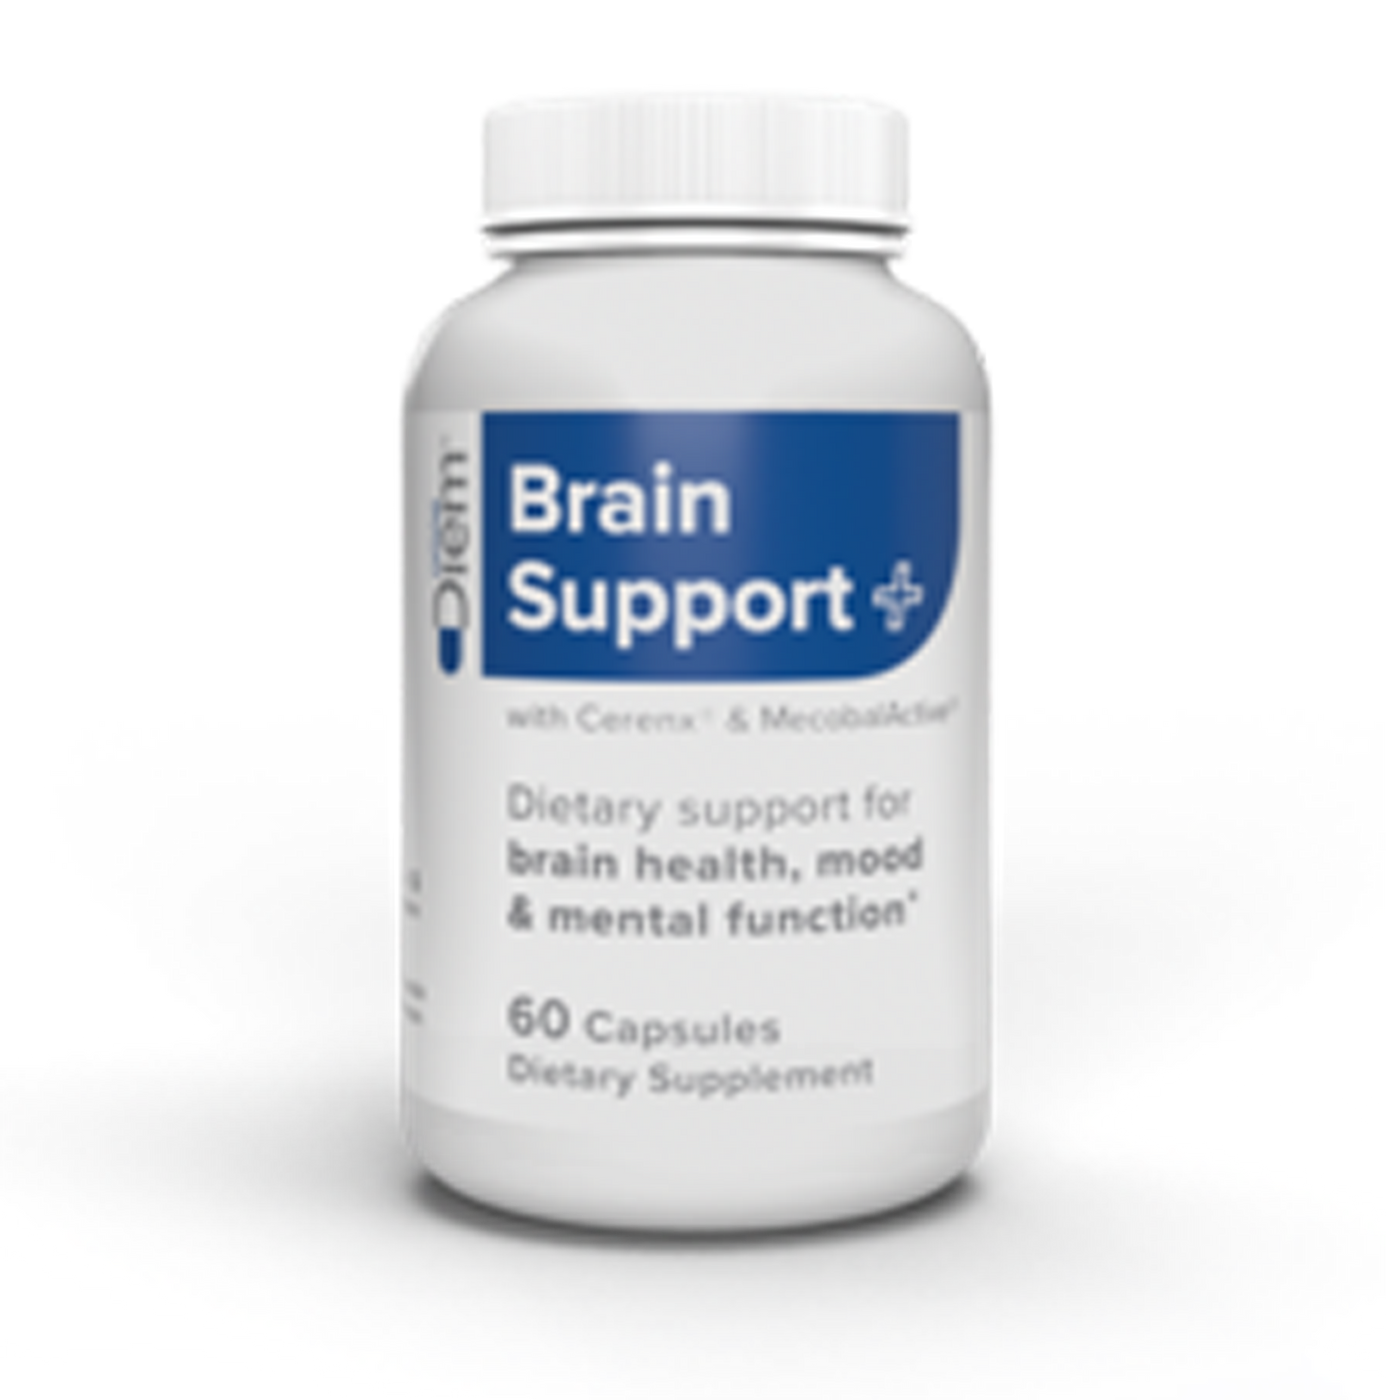 Brain Support+  Curated Wellness